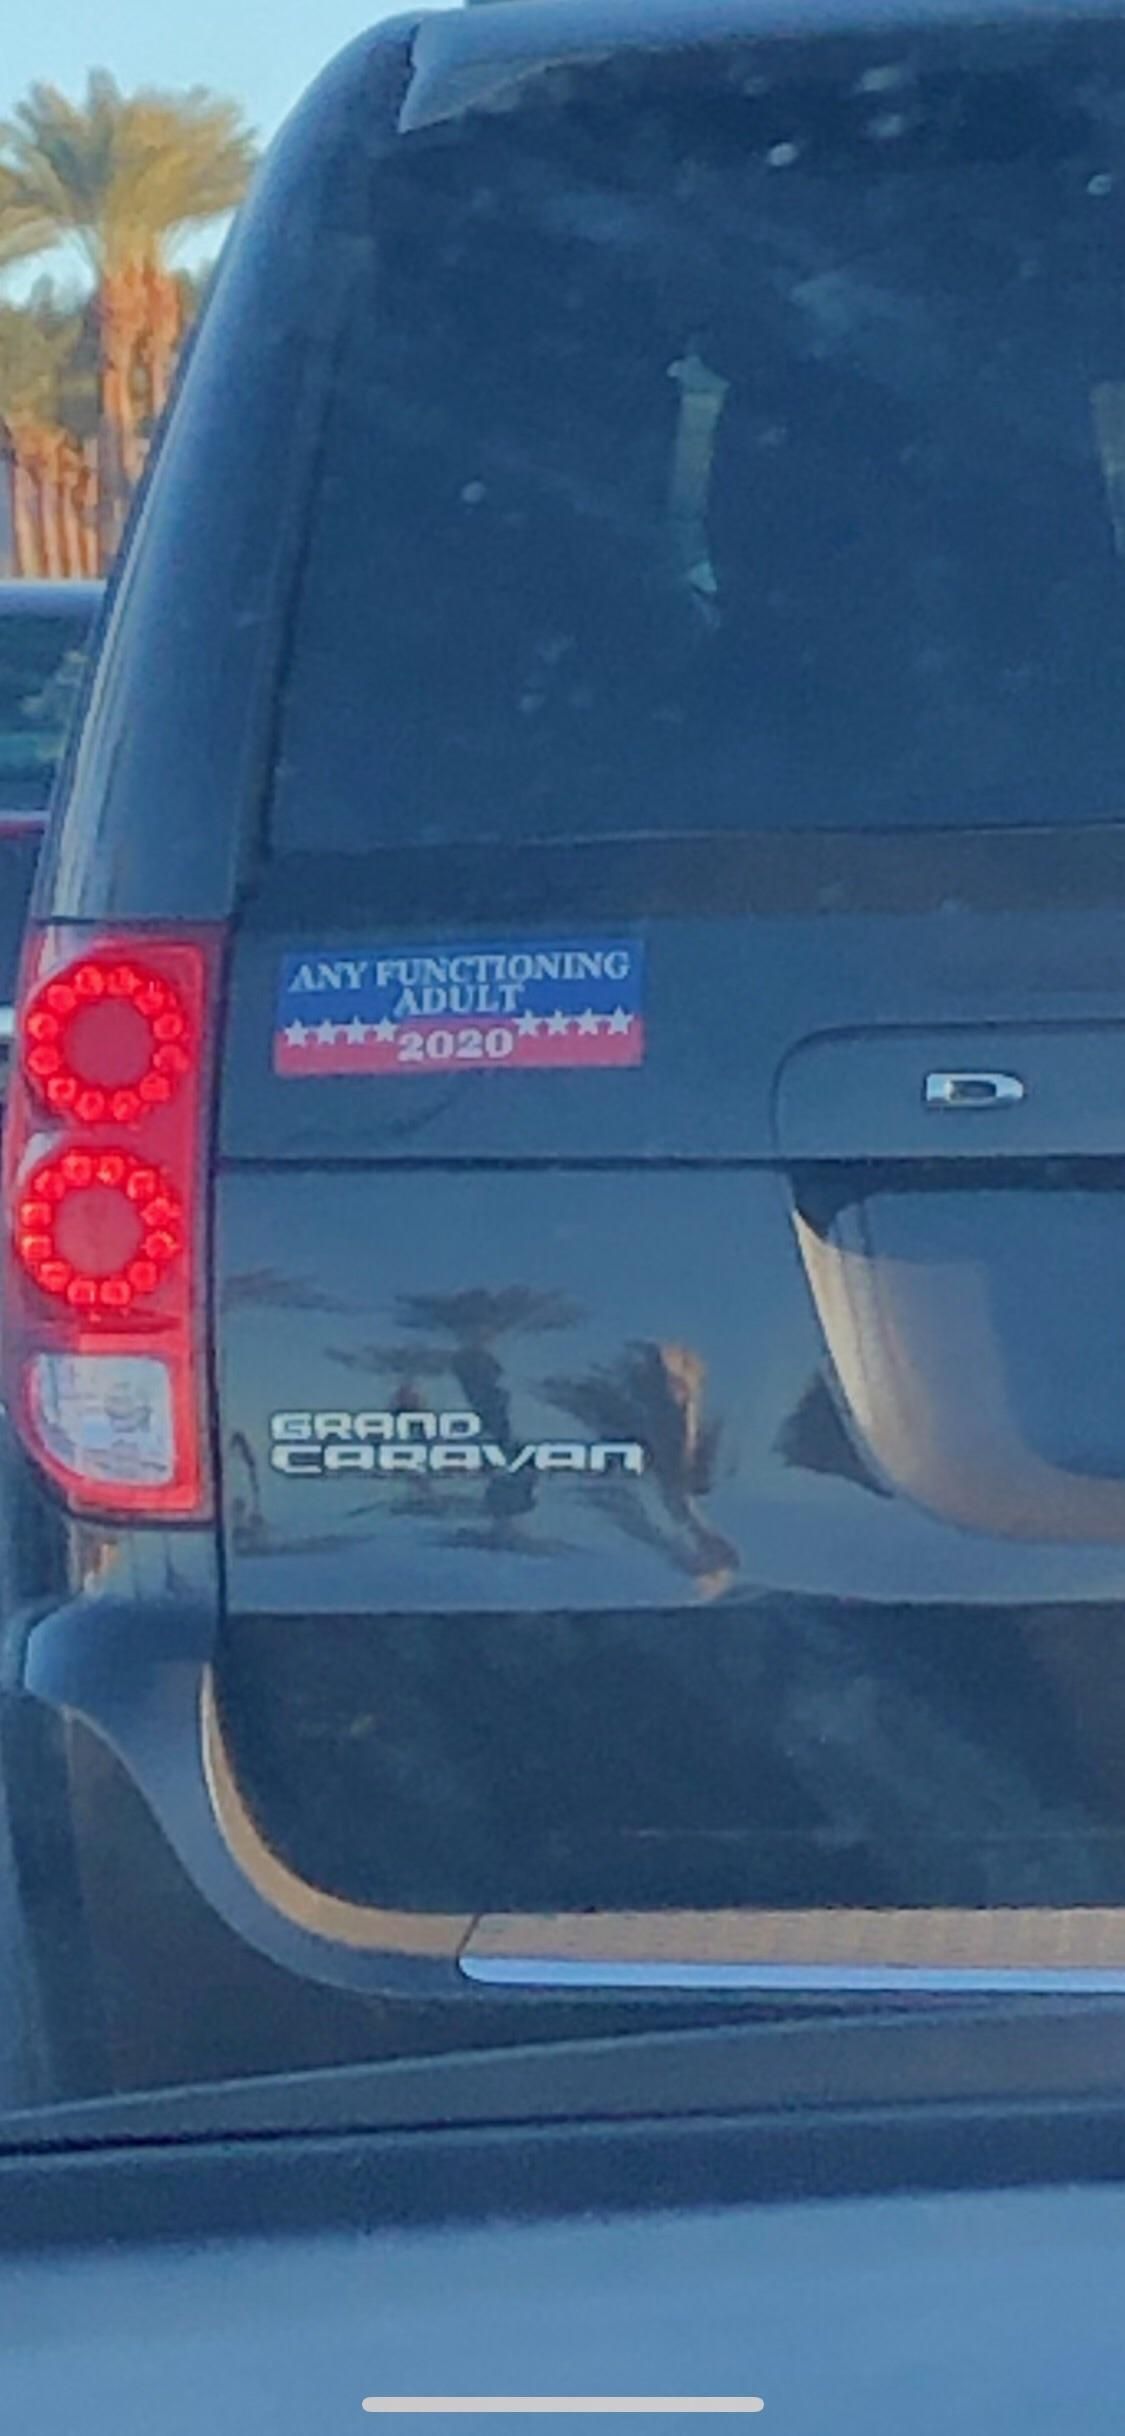 Bumper sticker of the year.